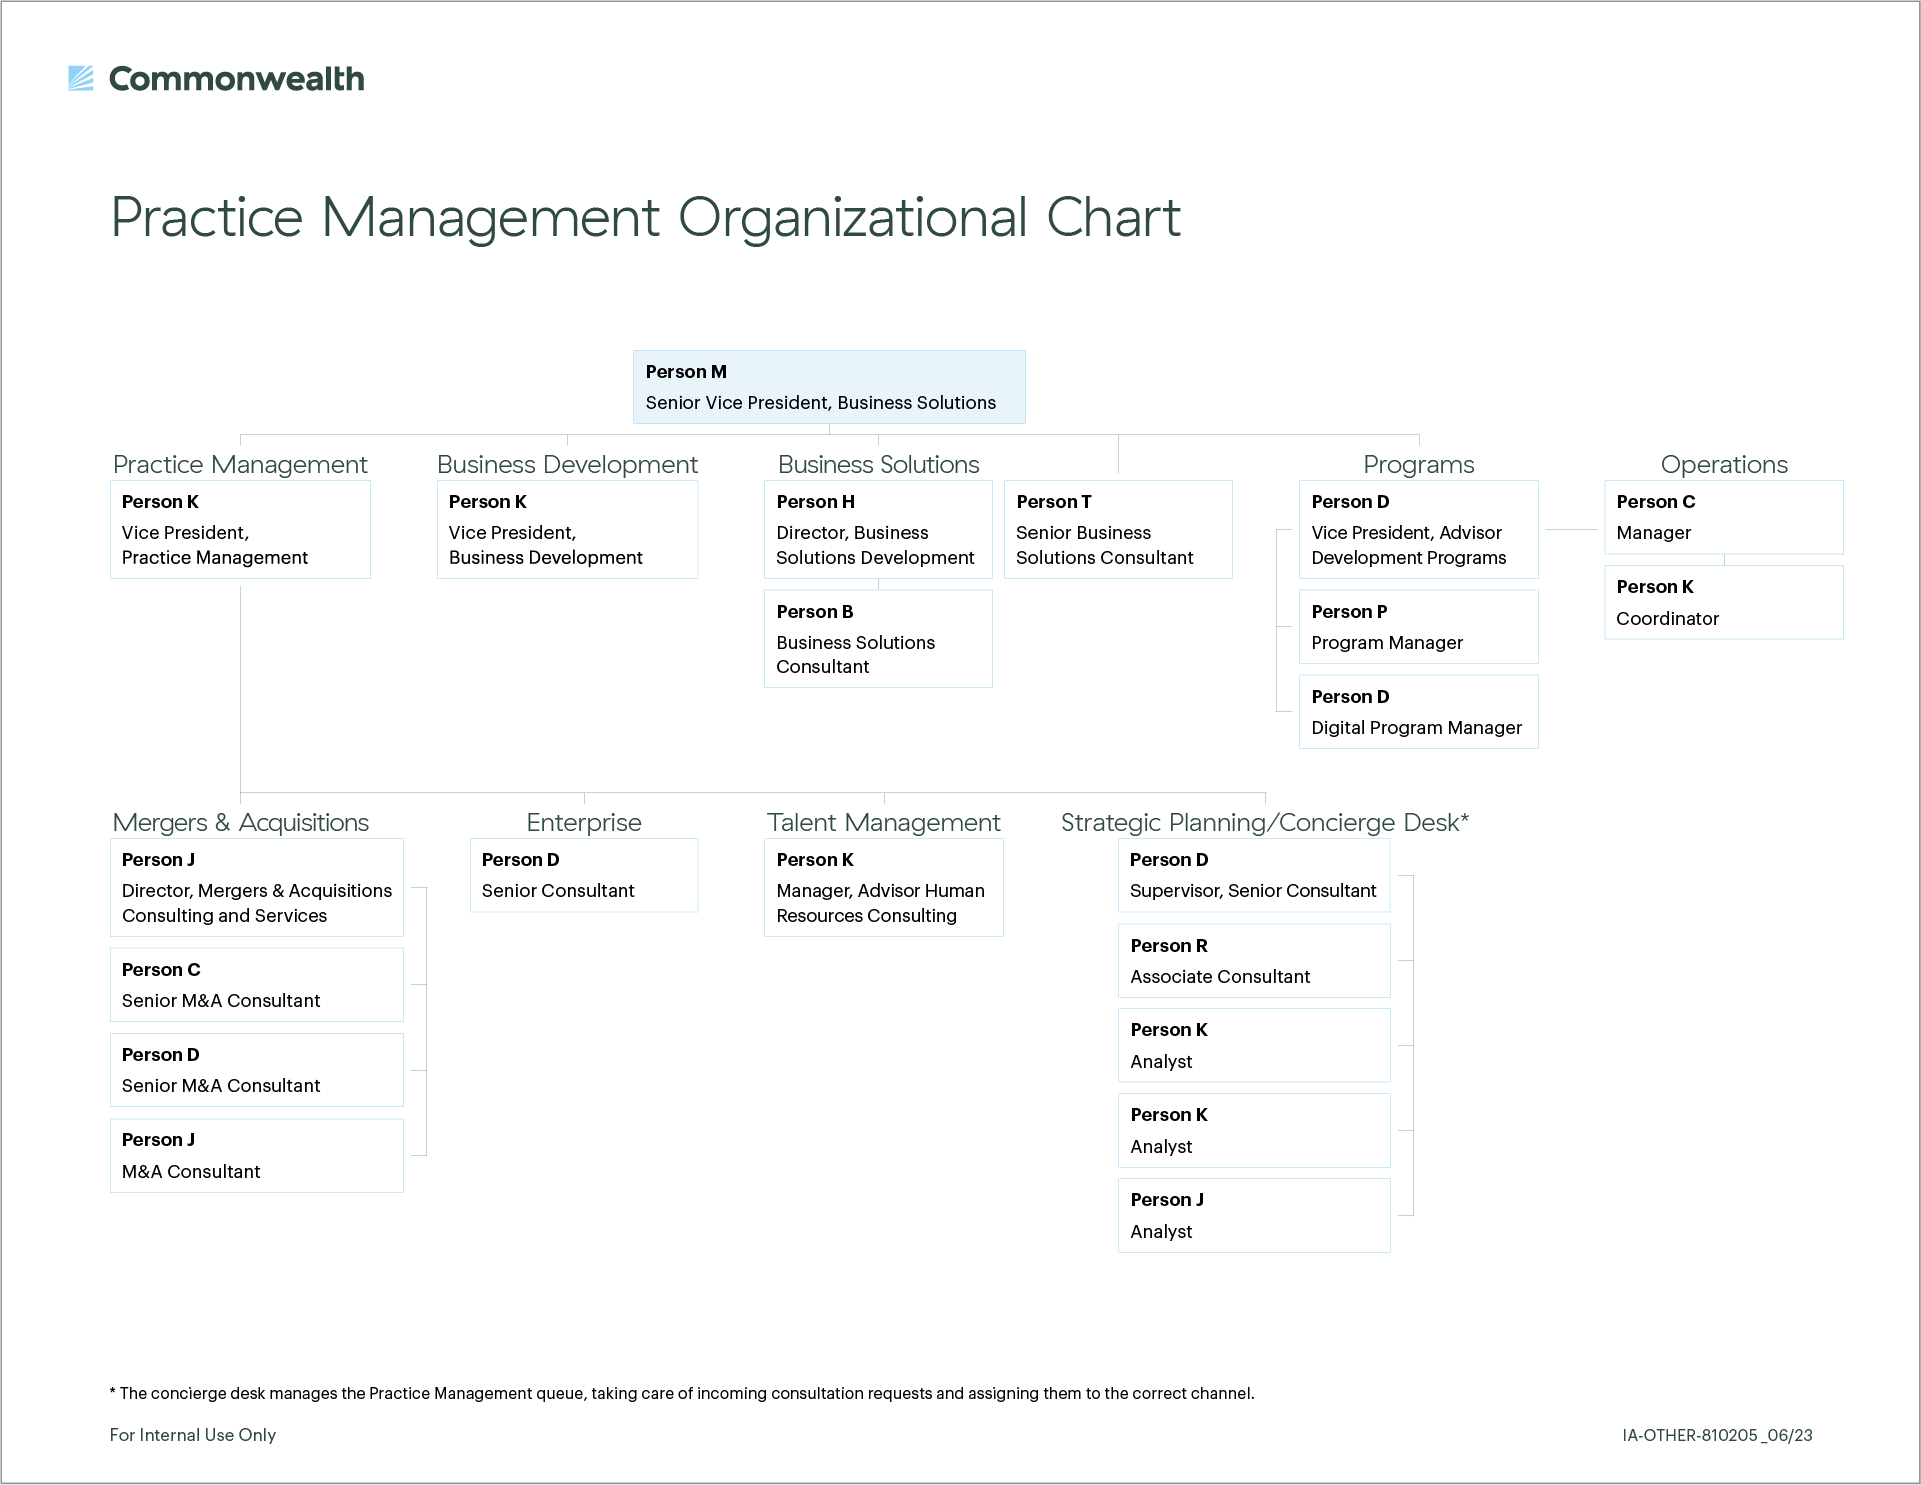 Org chart shows the restructured Practice Management department